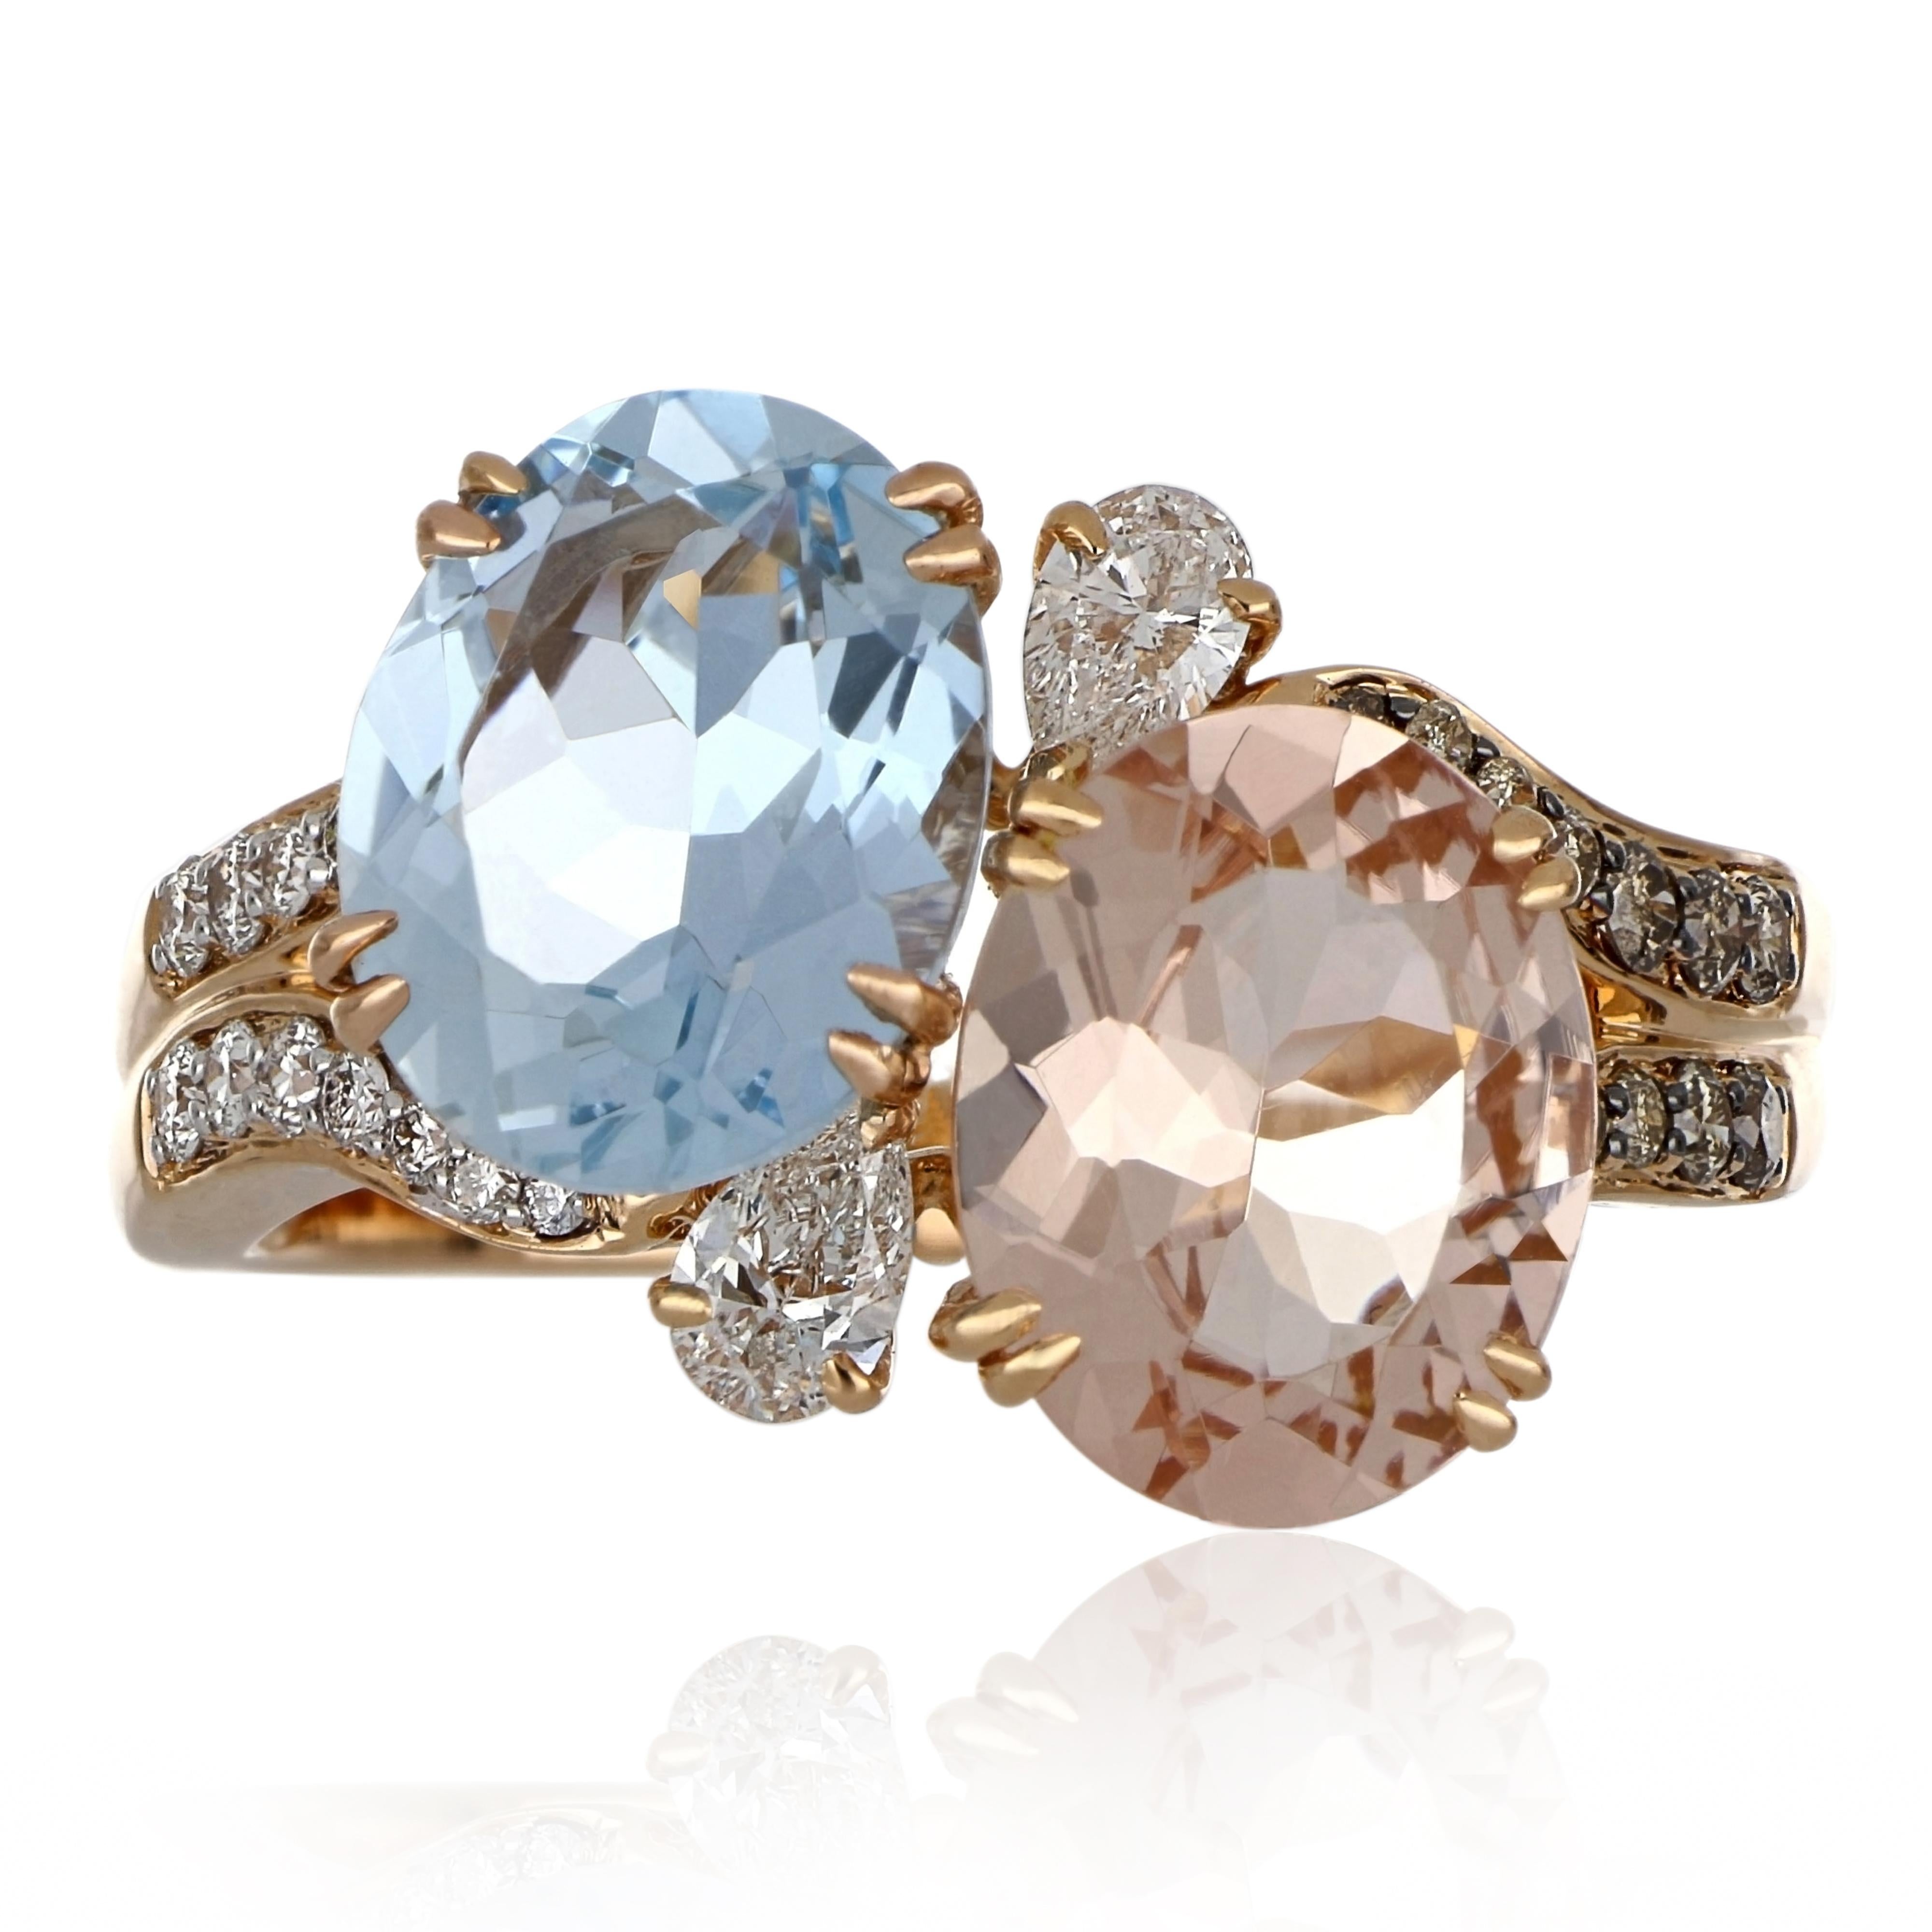 Elegant and Exquisitely detailed Cocktail Ring, set with 1.89 Ct Oval Cut Morganite & 2.16 Cts Oval Cut Aquamarine accented with Chocolate and White Diamonds, weighing approx. 0.45 total carat weight Beautifully Hand crafted in 18 Karat Rose